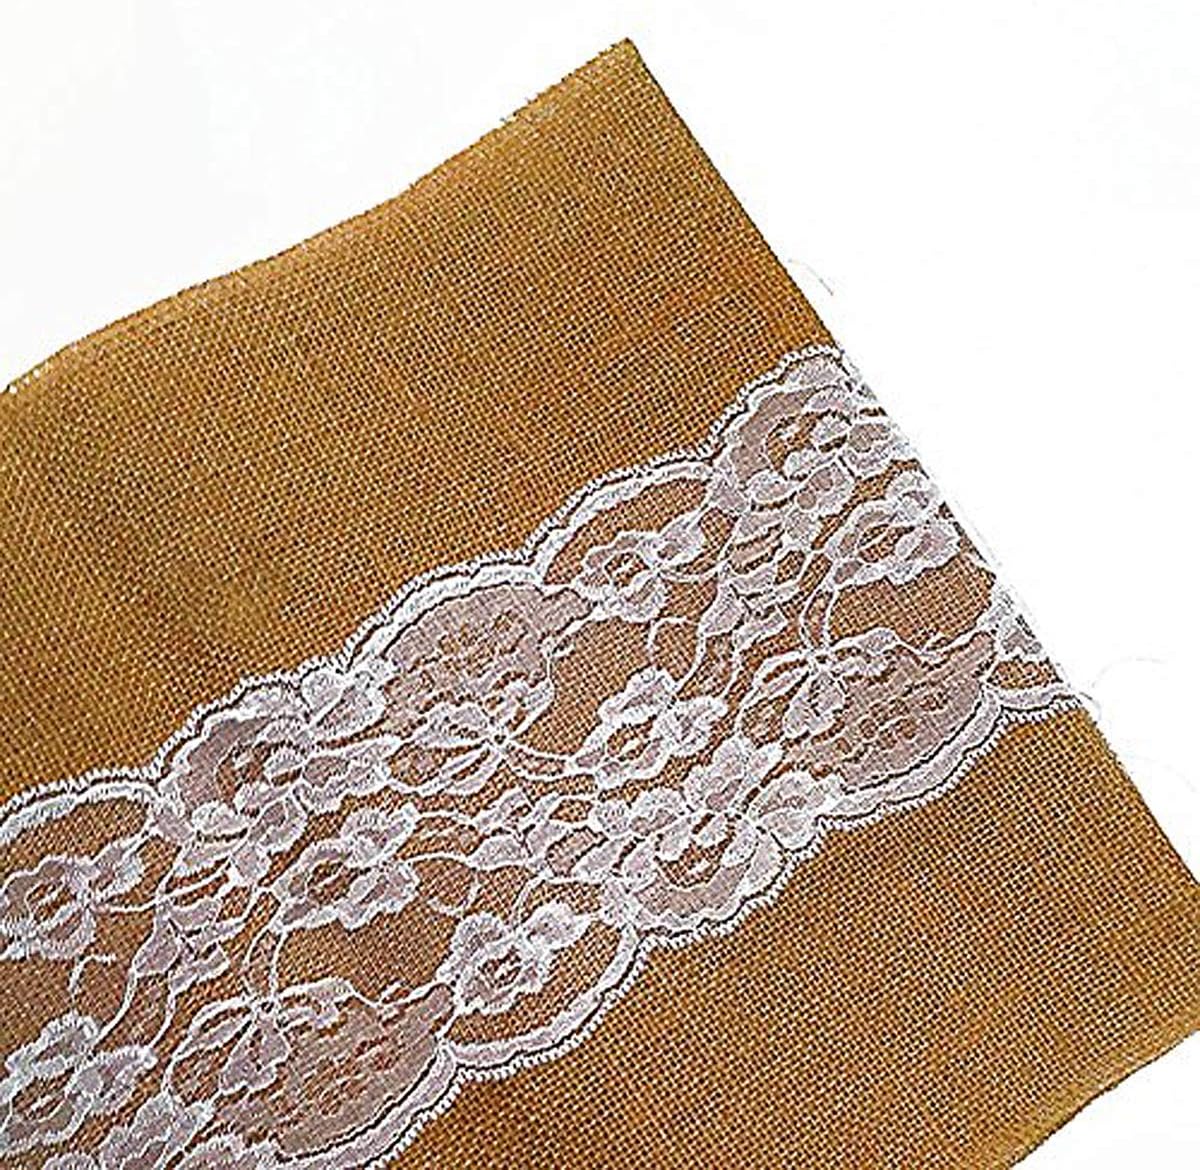 Burlap Table Runner 14" x 108" | Burlap Roll Lace Runner Perfect for Rustic Weddings and Events (White Lace in The Middle)